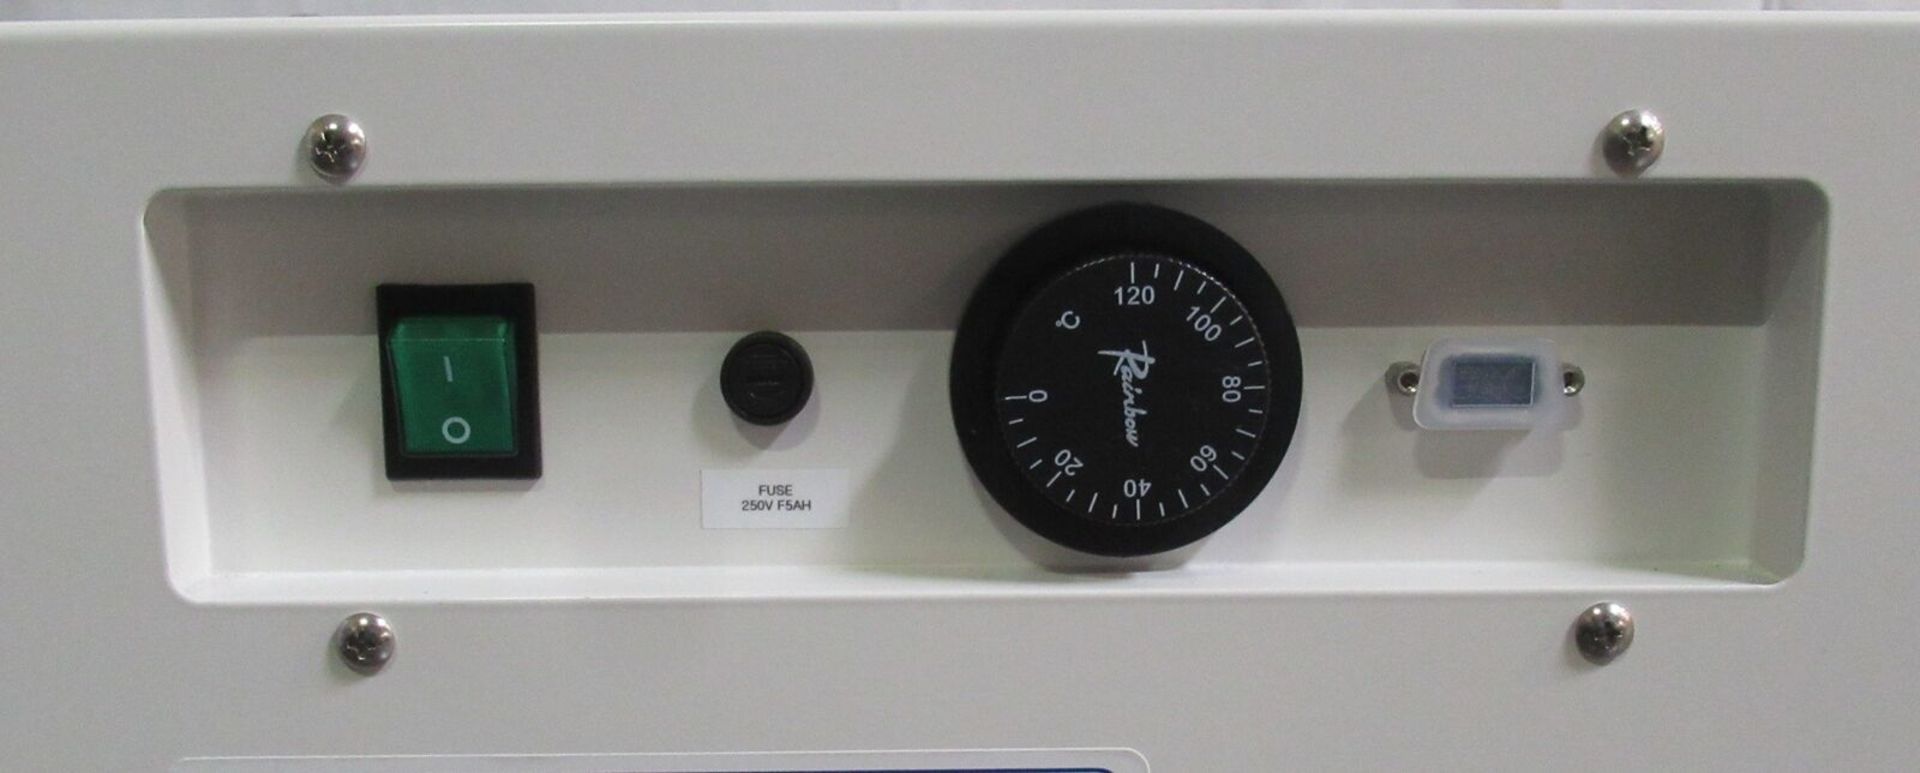 VWR 414005-132 Gravity Convection General Incubator - Image 7 of 8